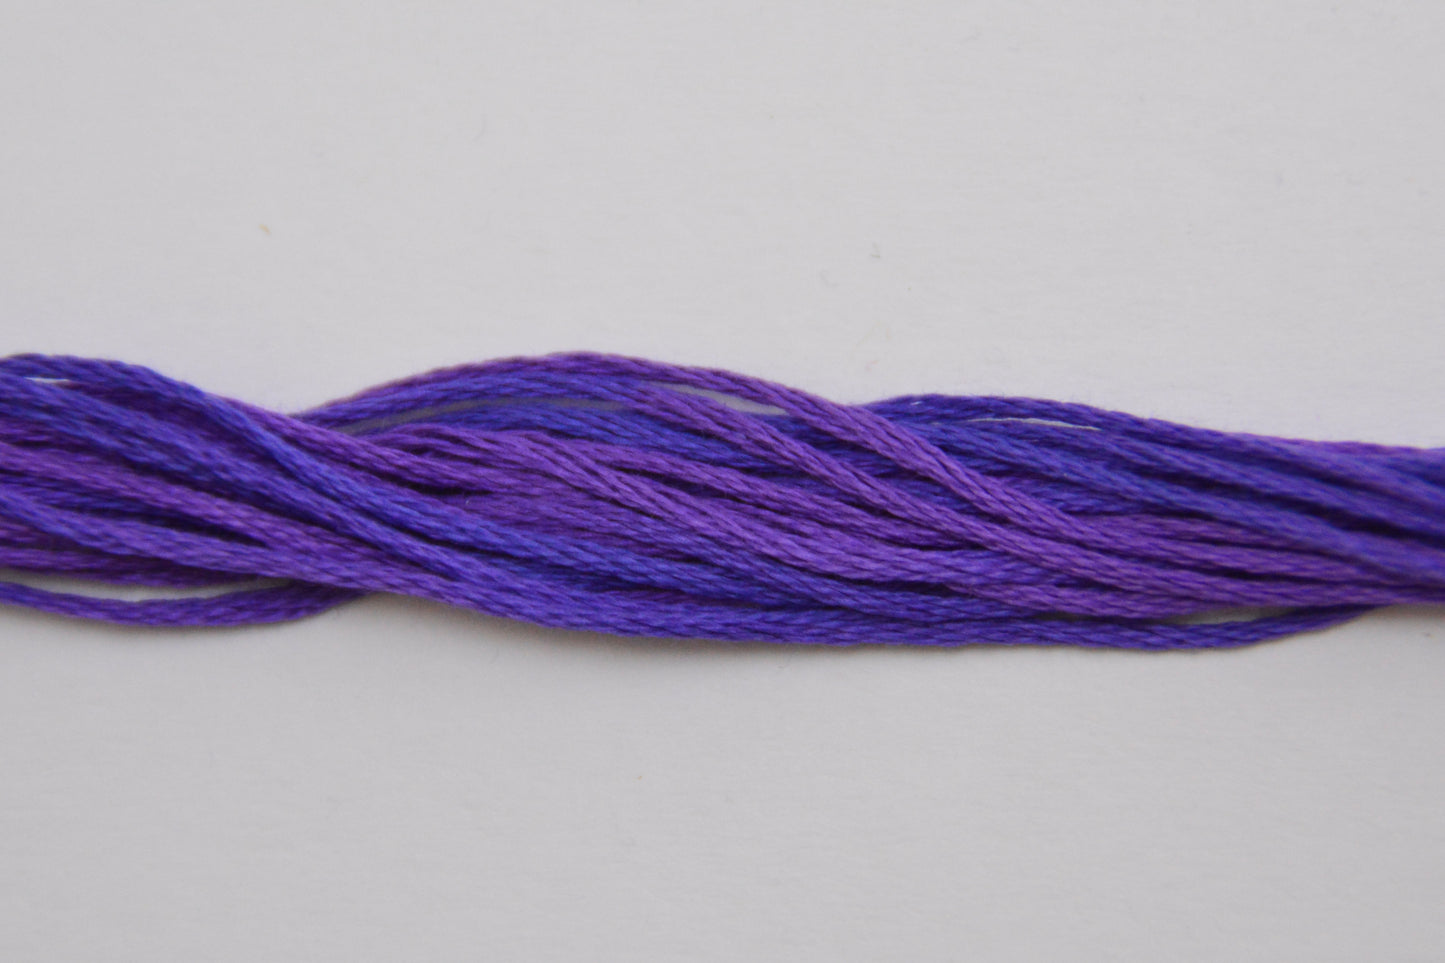 Ultraviolet 2336 Weeks Dye Works 6-Strand Hand-Dyed Embroidery Floss